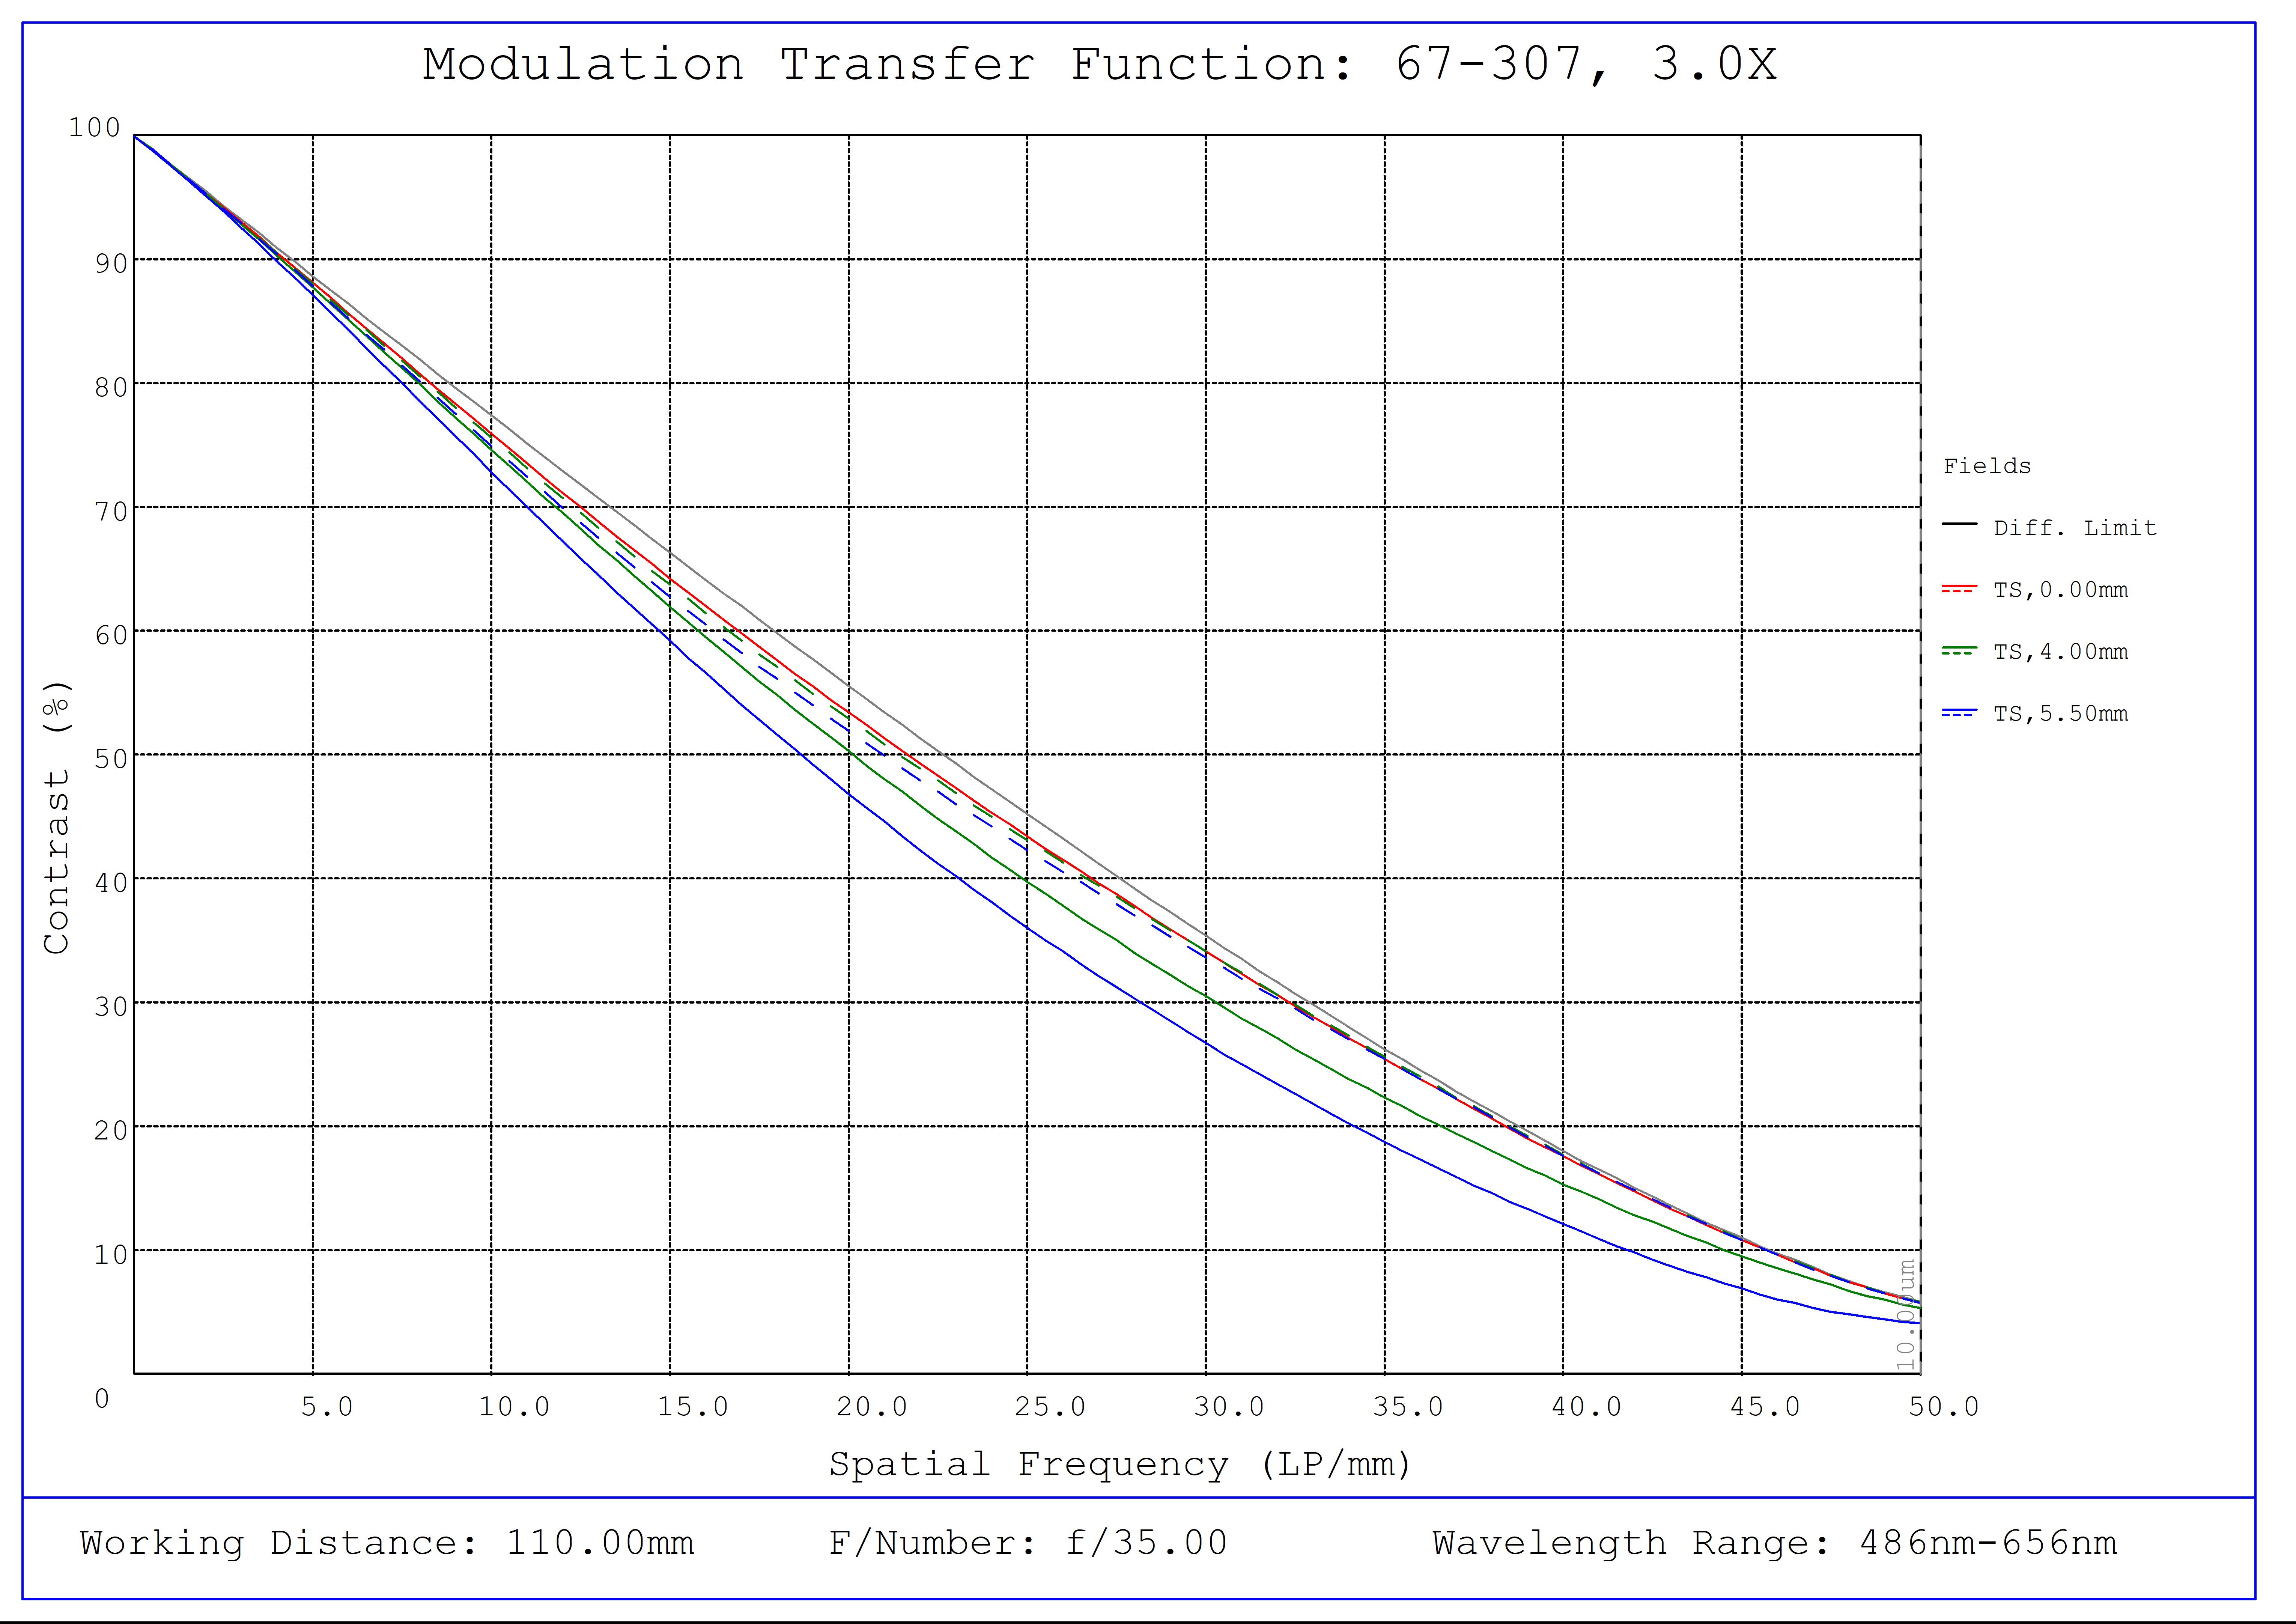 #67-307, 3X, 110mm WD, In-Line CompactTL™ Telecentric Lens, Modulated Transfer Function (MTF) Plot, 110mm Working Distance, f35